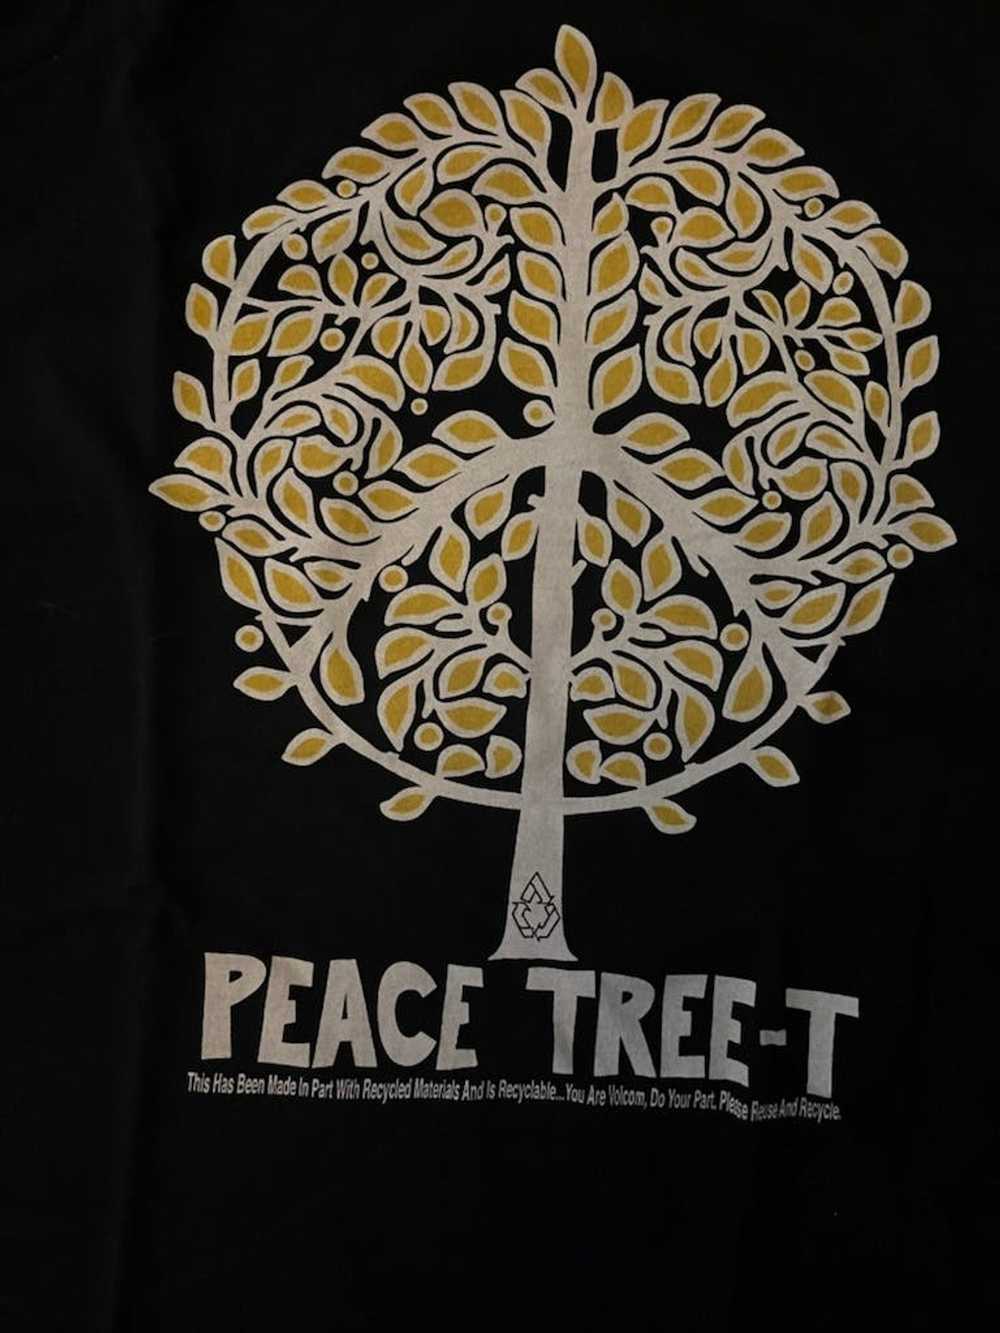 Volcom Peace Tree-T w/ pro-recycle message - image 3